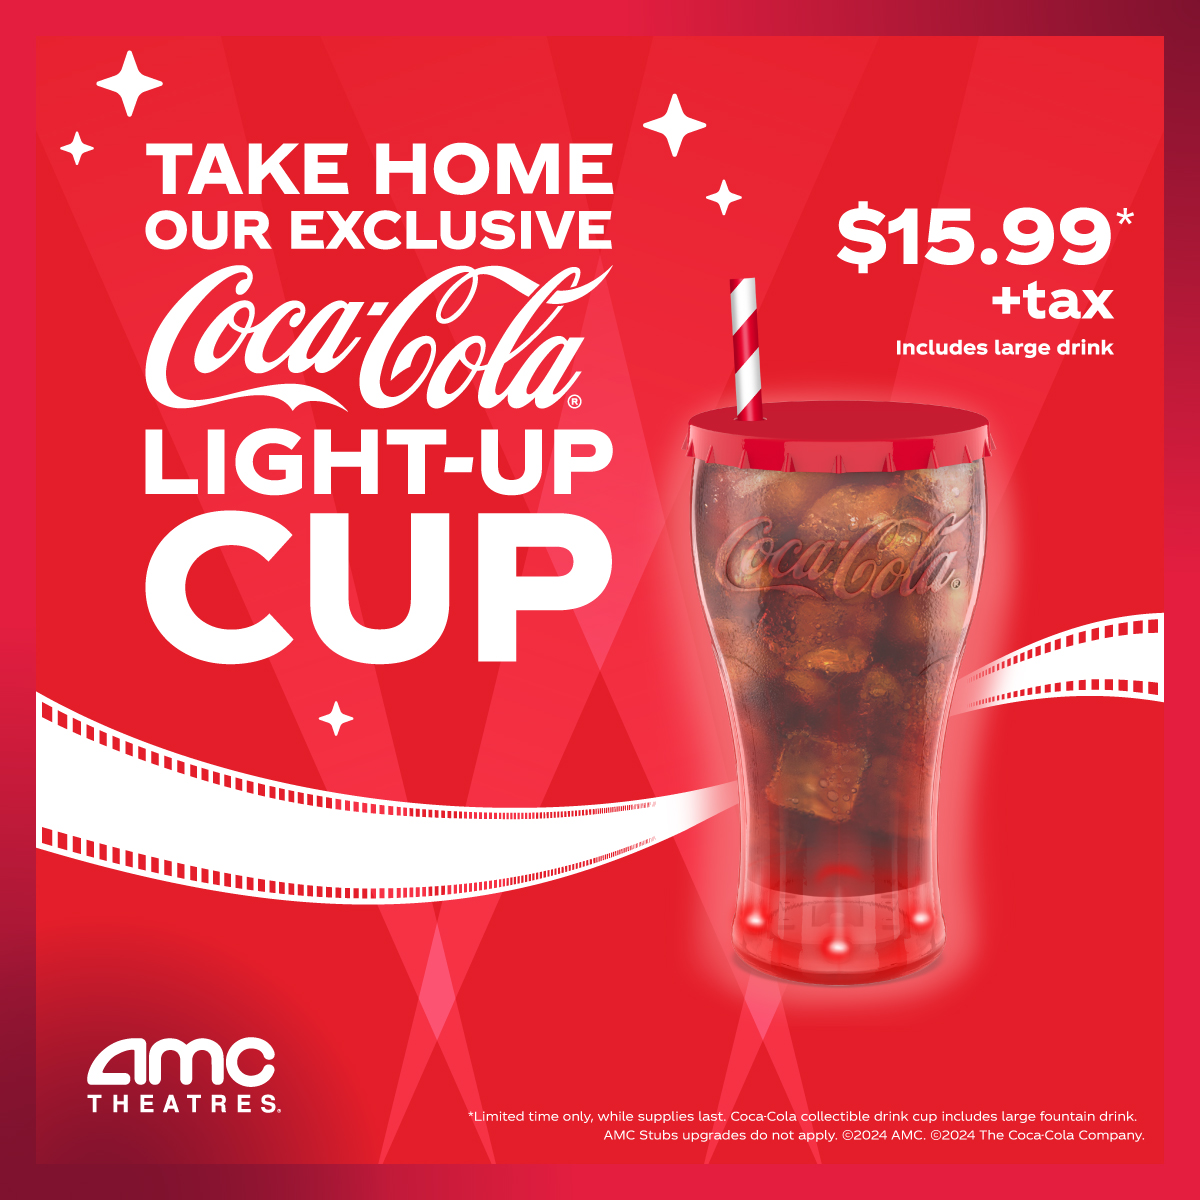 AMC Theatres on X: Nothing goes better with 🍿 than a Coke